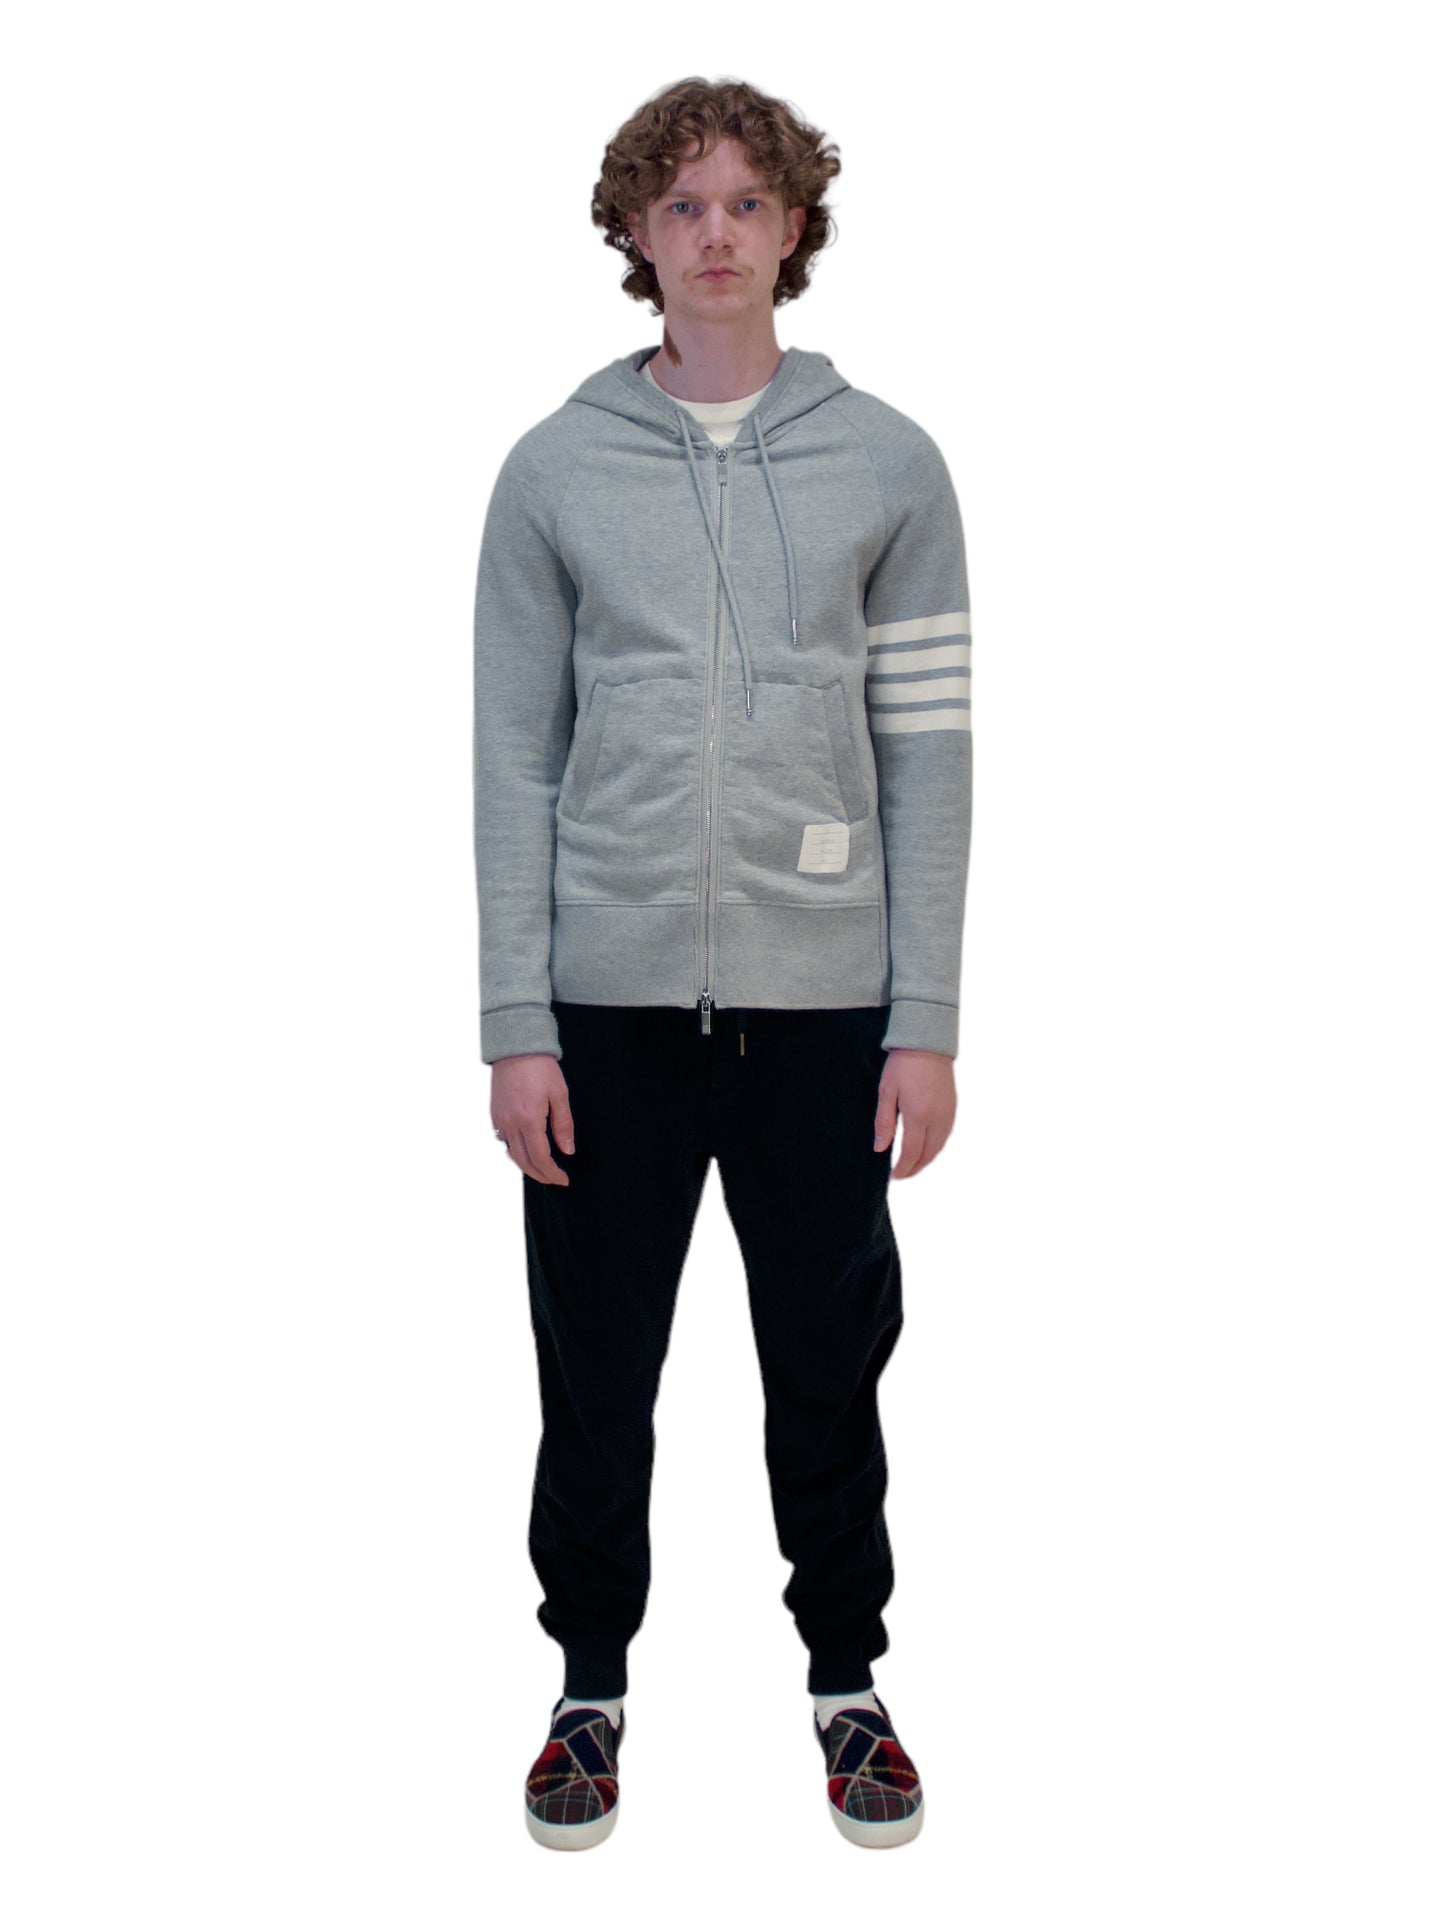 Thom Browne Grey 4-Bar Zip-Up Hoodie - Genuine Design Luxury Consignment for Men. New & Pre-Owned Clothing, Shoes, & Accessories. Calgary, Canada